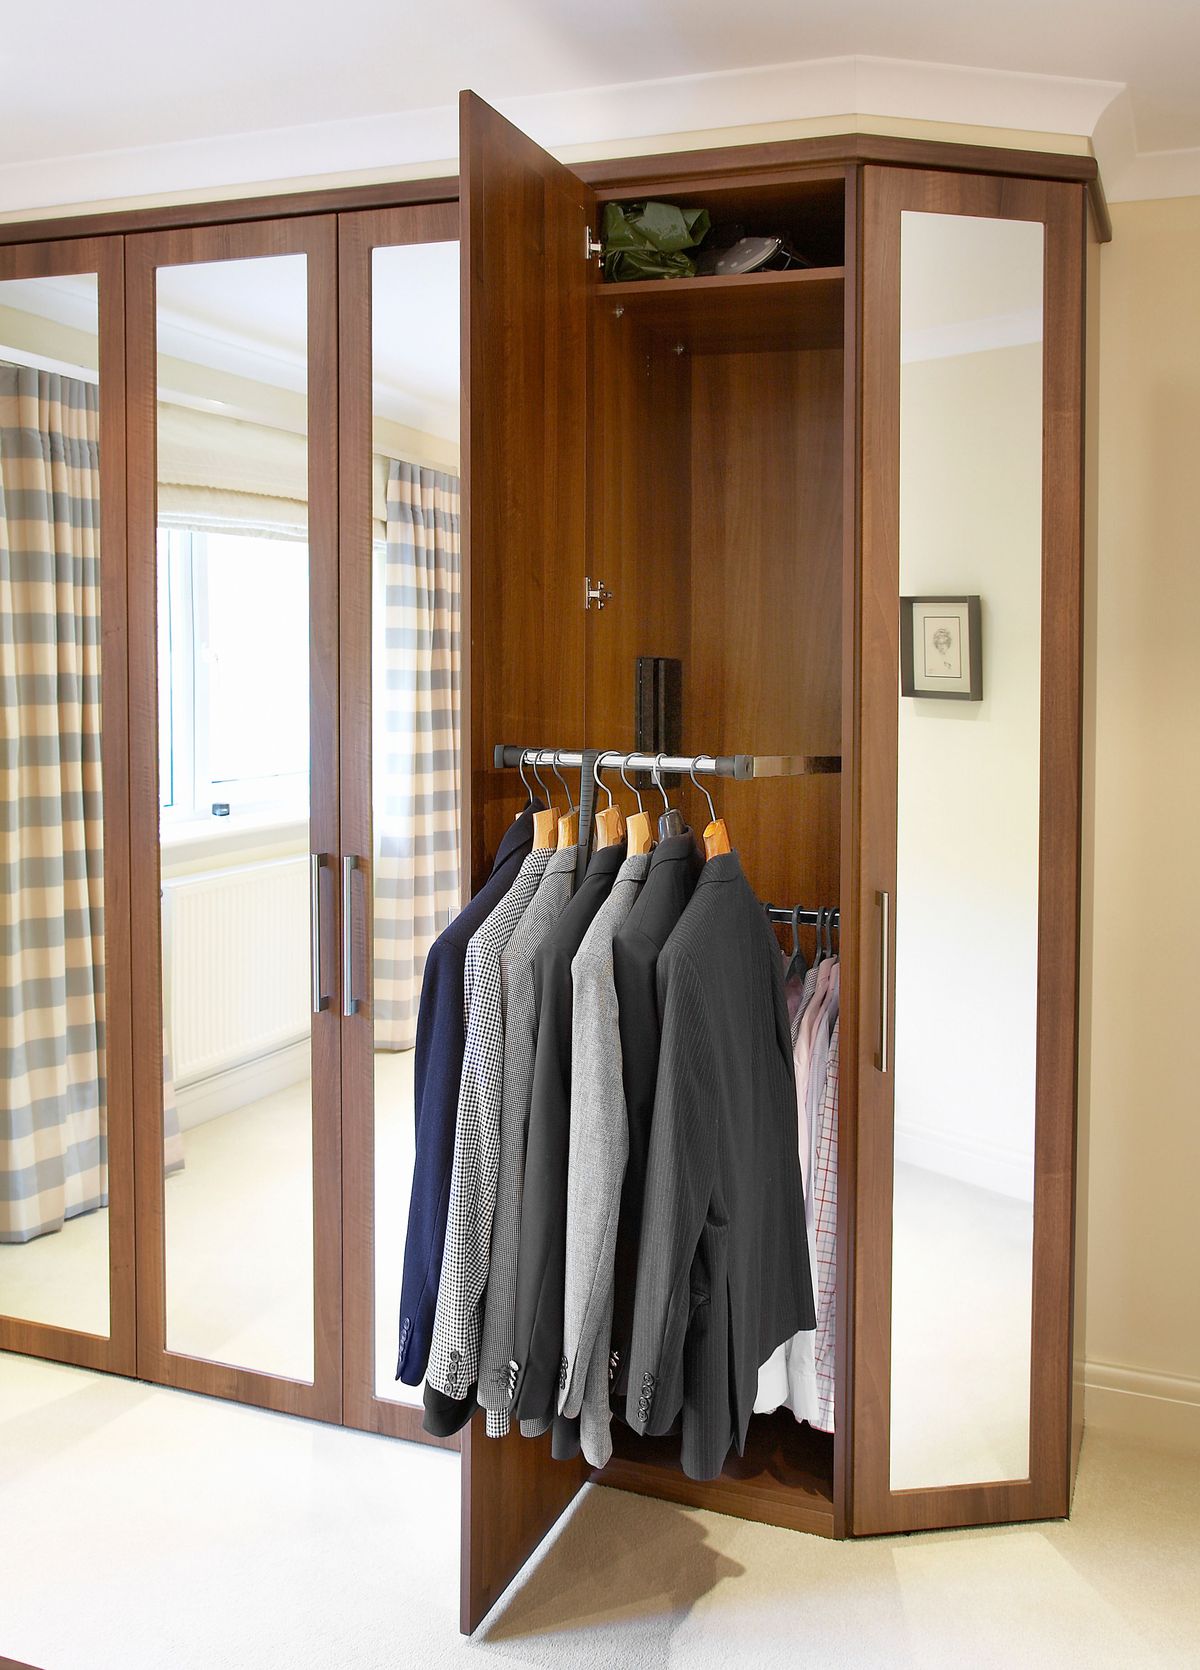 No Ladder Needed storage solution when planning to redo your bedroom closet